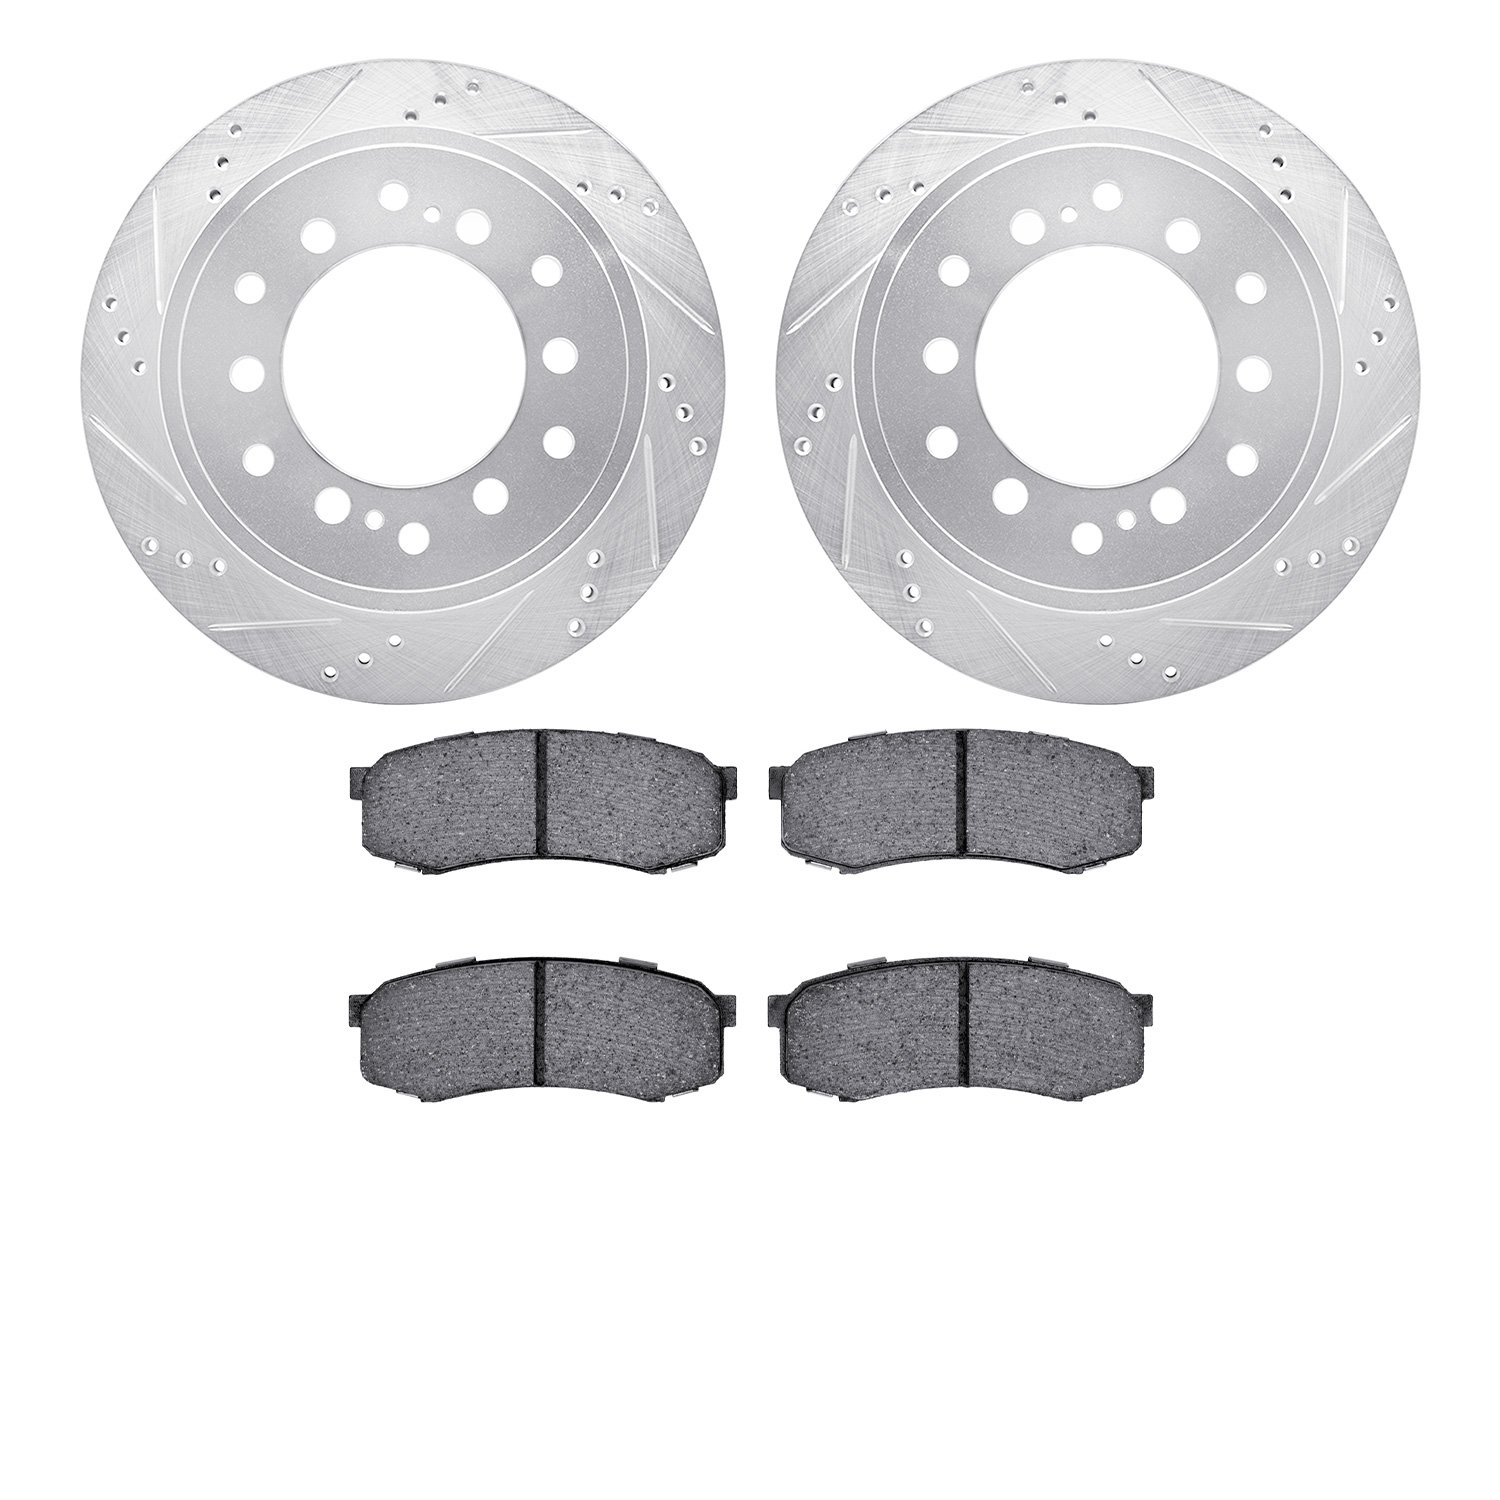 7402-76024 Drilled/Slotted Brake Rotors with Ultimate-Duty Brake Pads Kit [Silver], Fits Select Lexus/Toyota/Scion, Position: Re